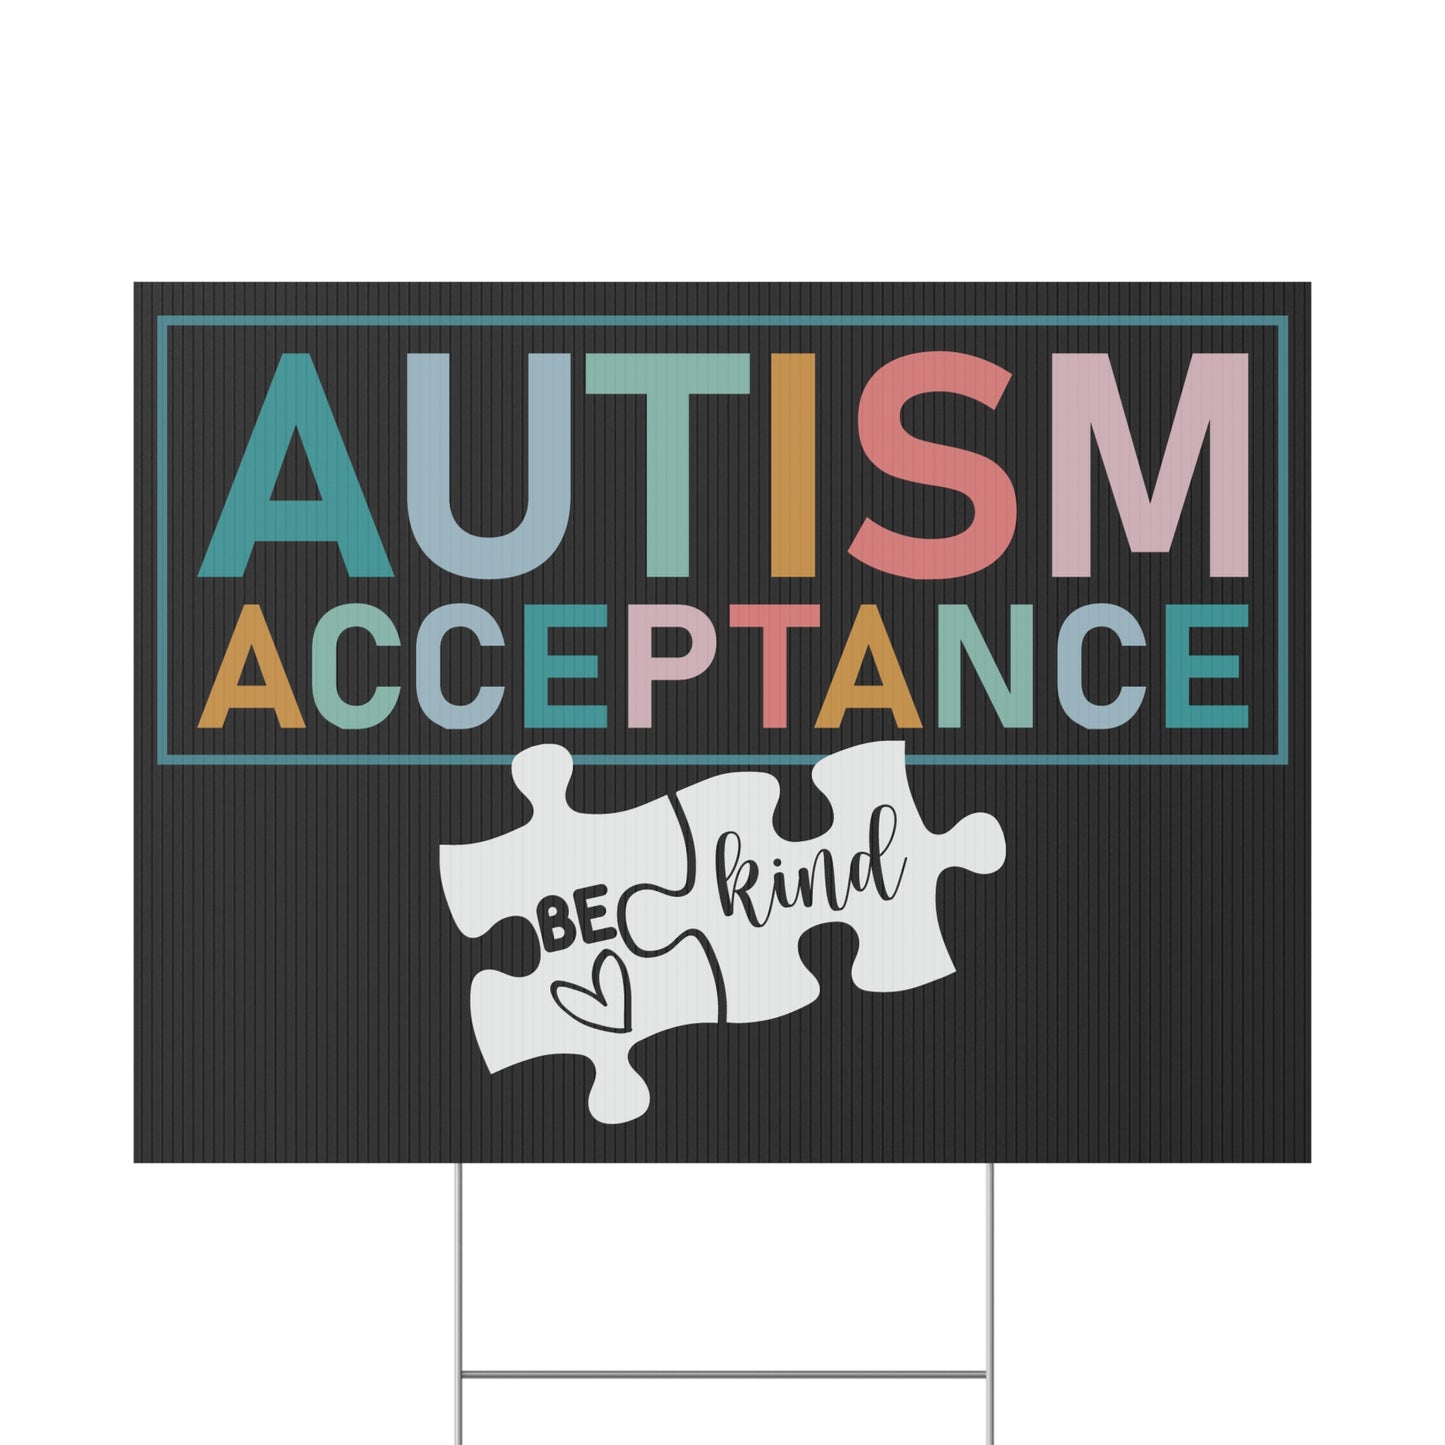 Autism Awareness Yard Sign, 18x12, 24x18, 36x24, Double Sided, H-Stake Included, v2